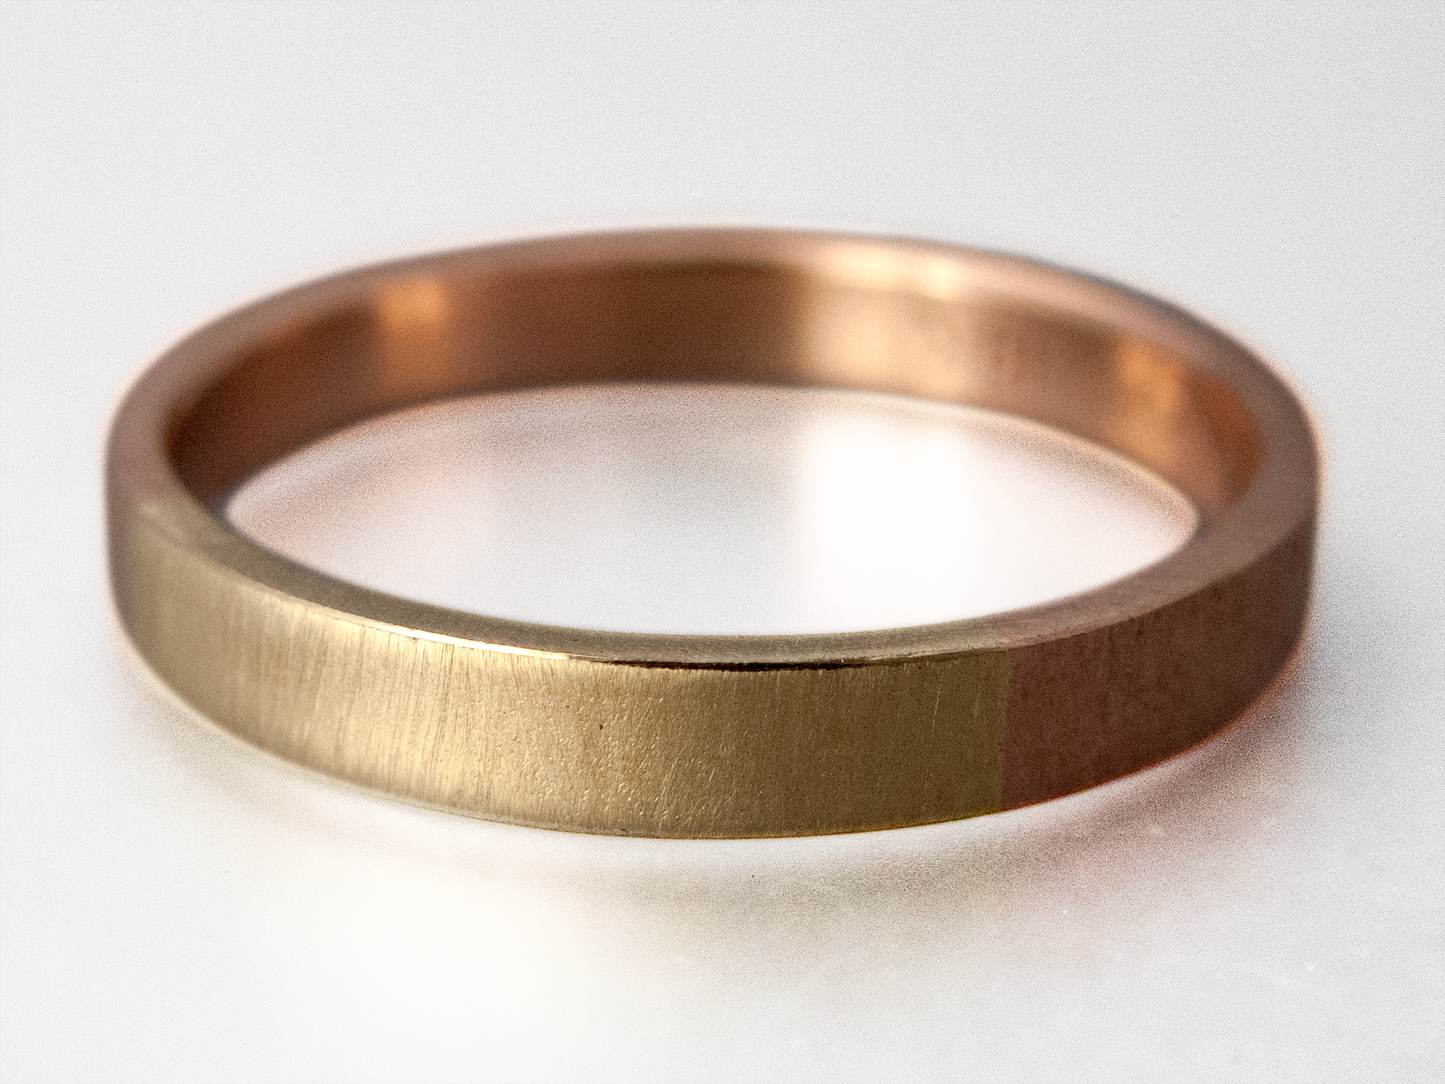 Wide Flat Two Tone Gold Wedding Ring - Opposites Attract Band 75/25  mix of 14k White, Yellow or Rose Gold, 3mm-6mm width